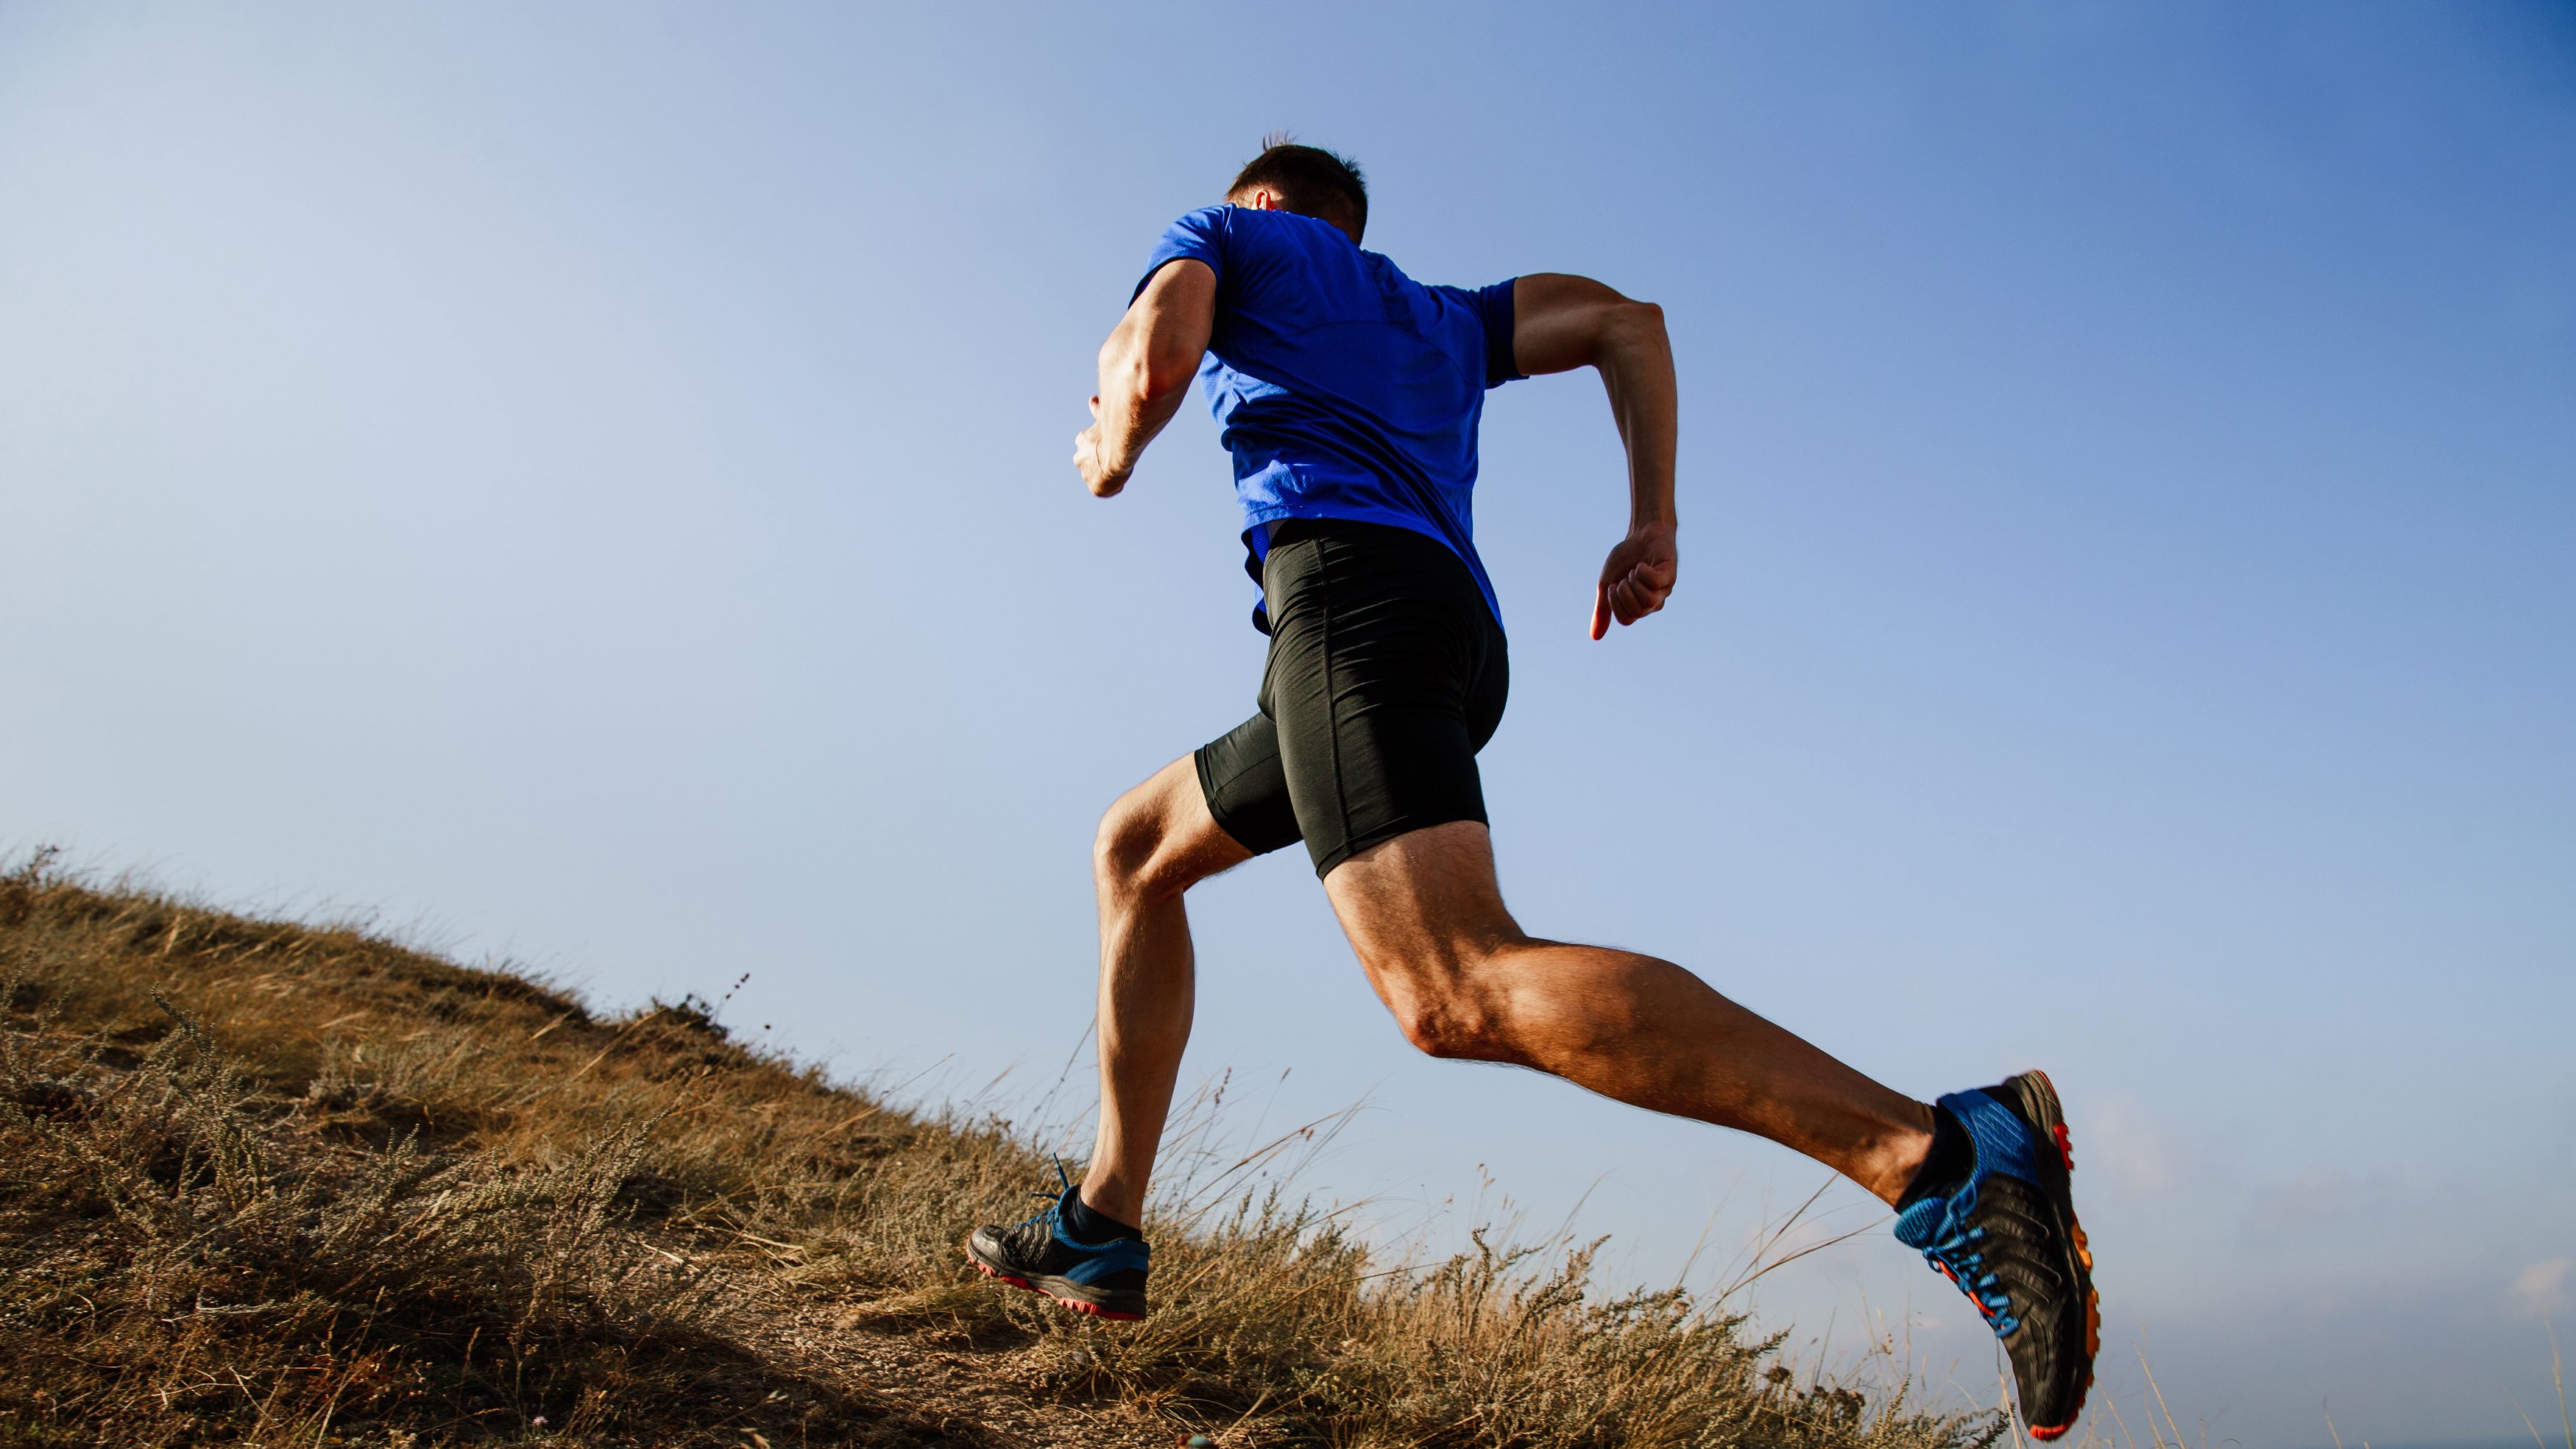 7 Running Drills to Improve Speed, Form and Efficiency - Strength